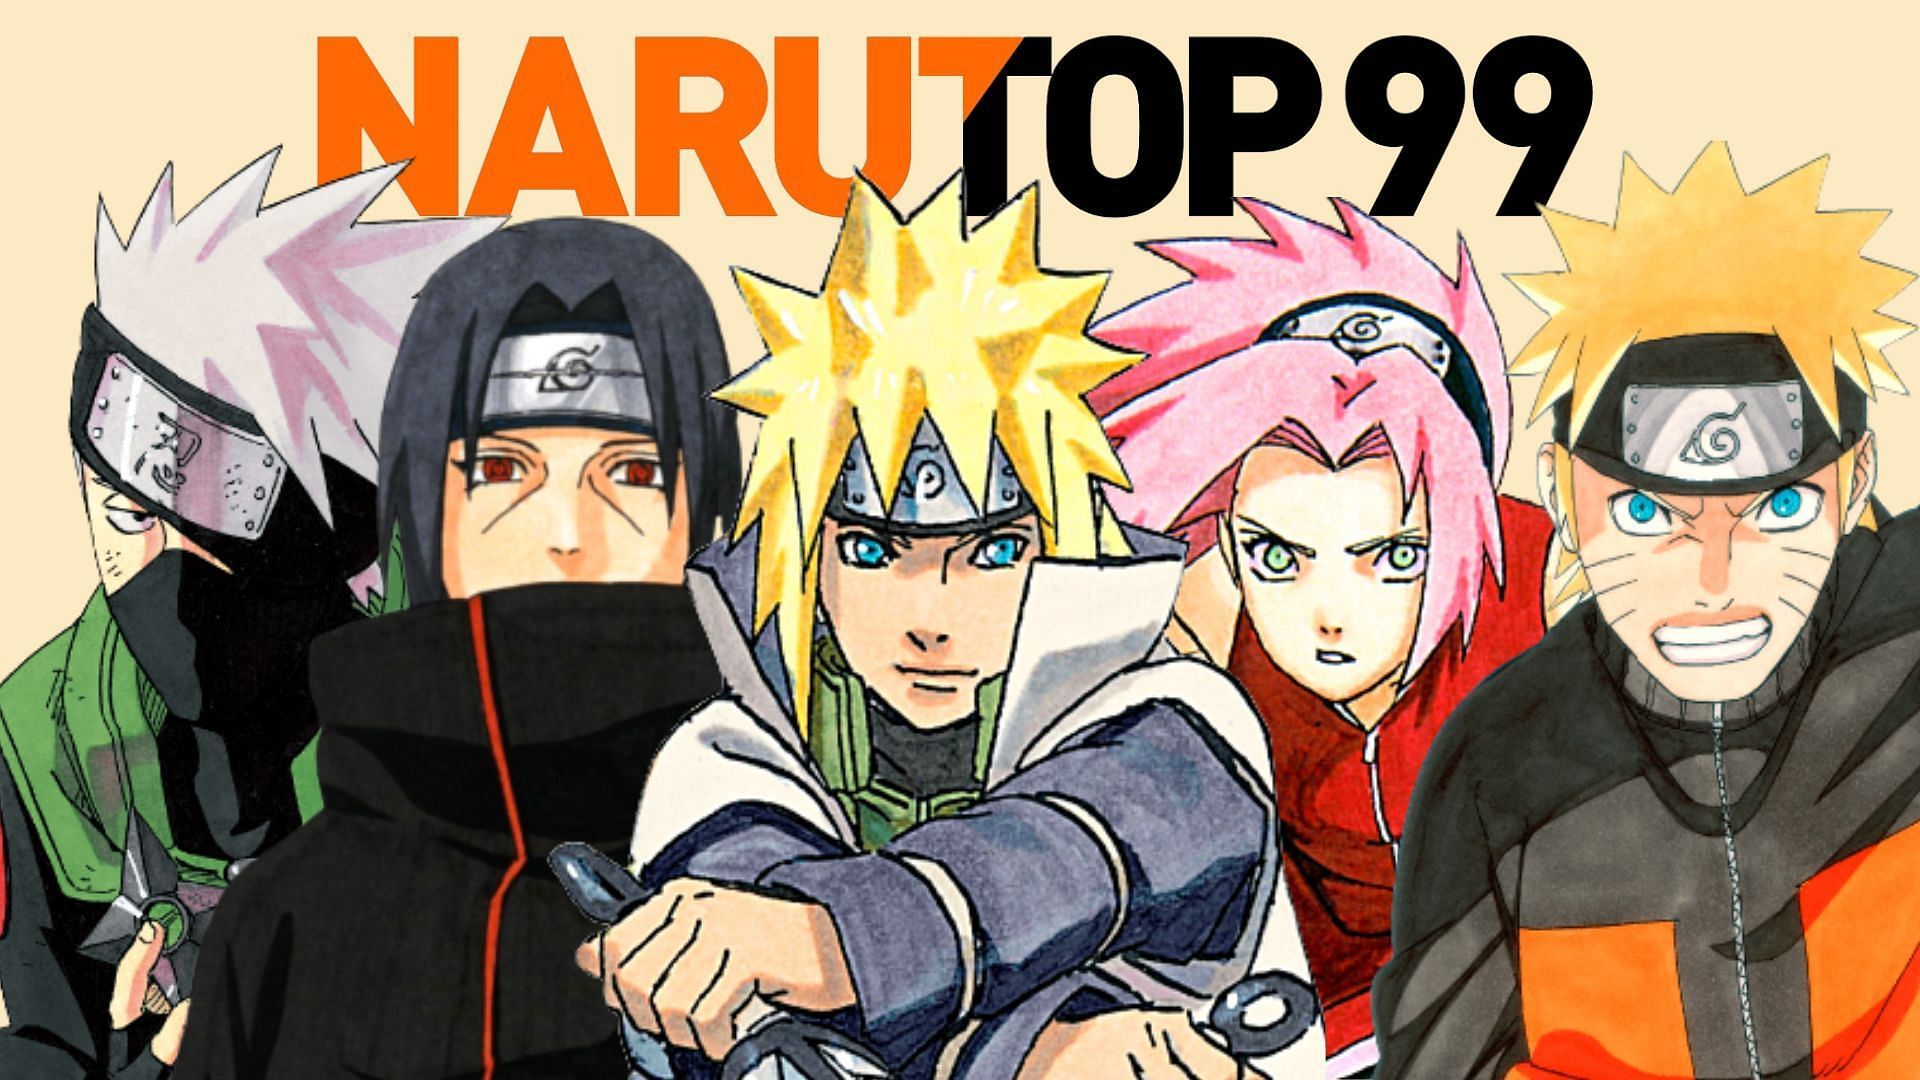 Narutop99 results so far: Top 10 characters, according to polls